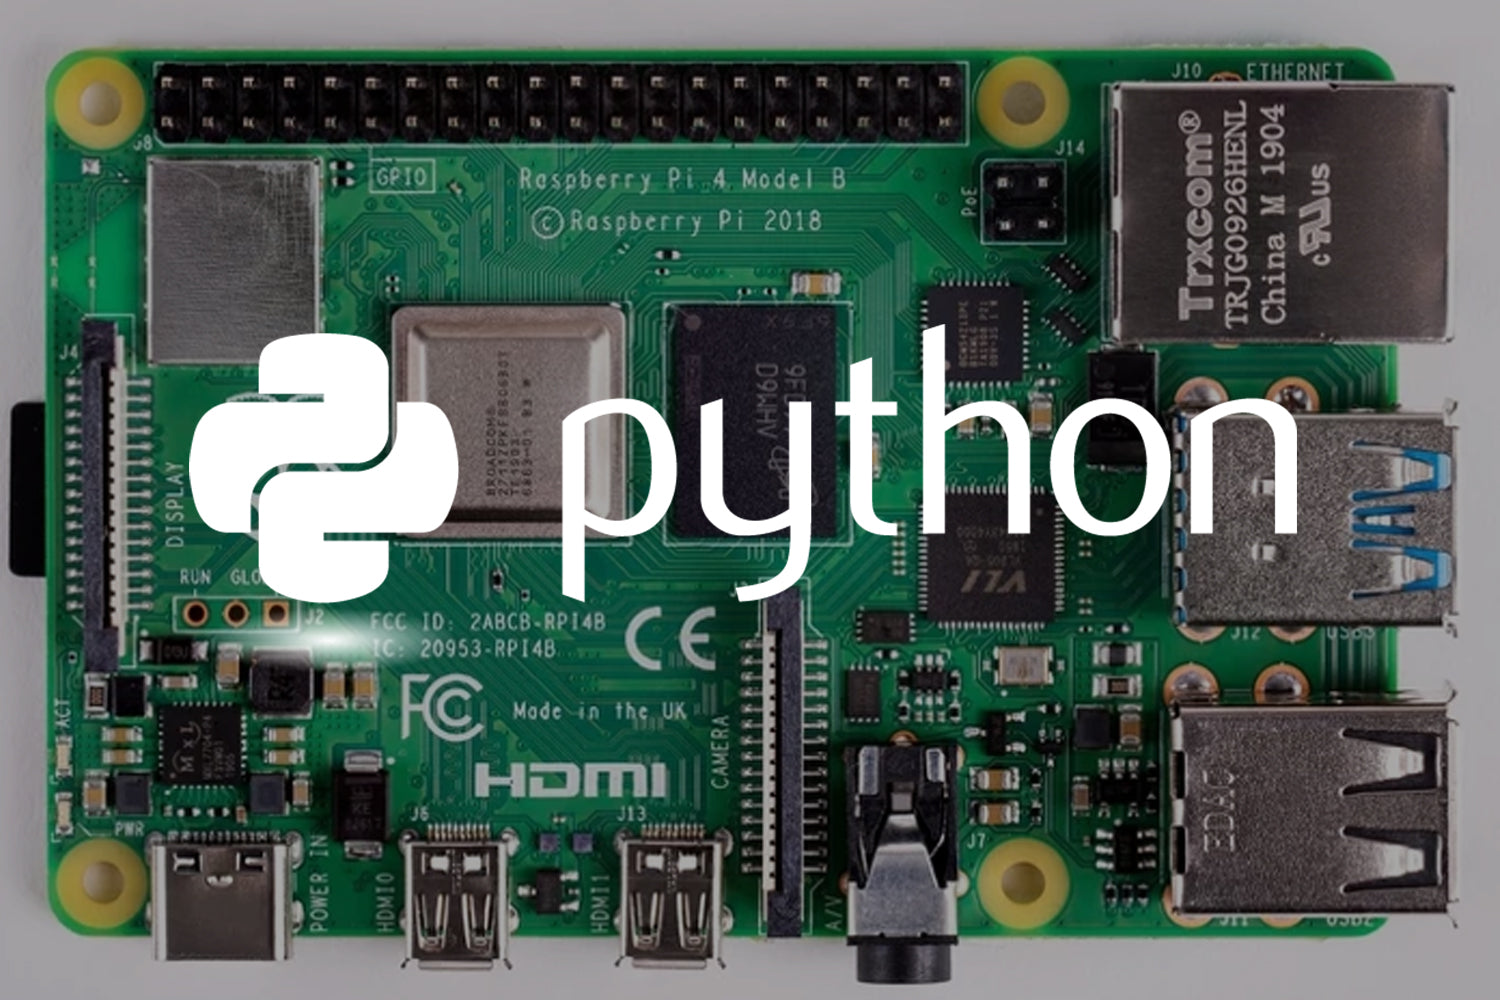 Get Started With BEVRLink 4 Channel Relay with 4 Inputs - Raspberry PI Manager Python